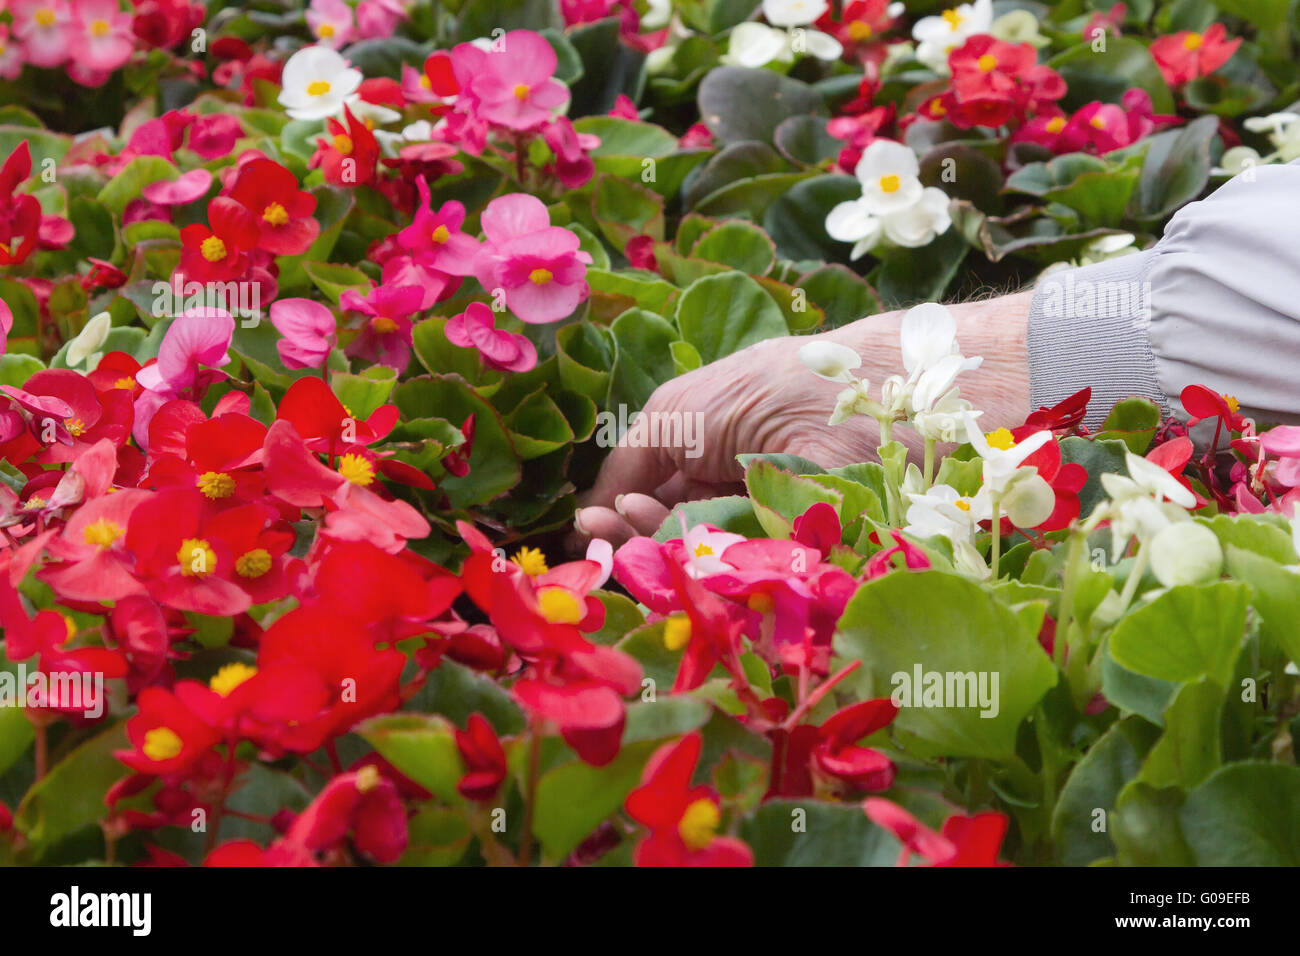 Customer's hand selecting annual flowers in a retail nursery. Stock Photo